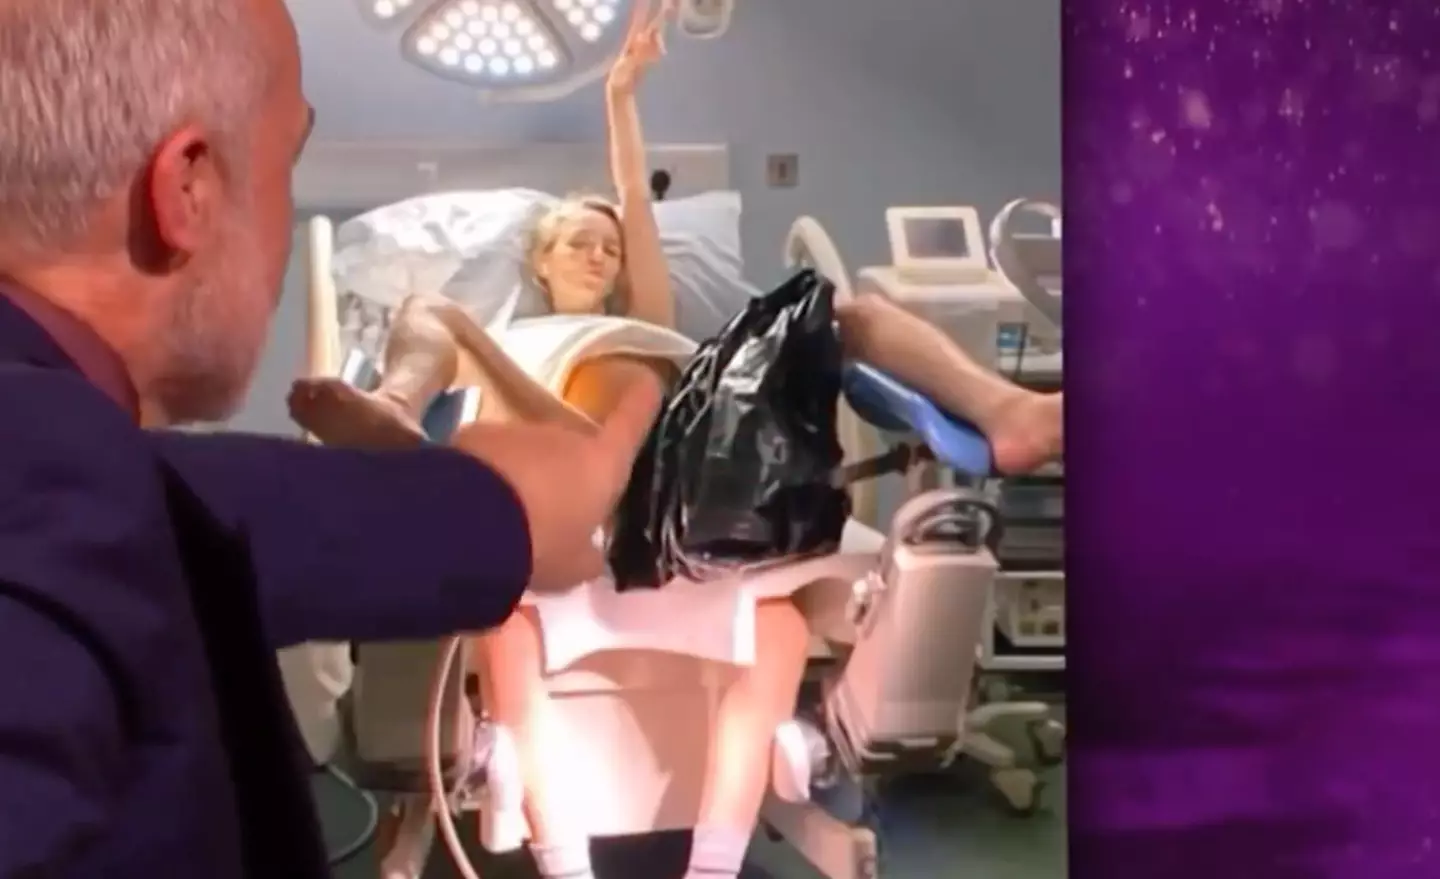 Jodie Comer shared a bizarre behind-the-scenes photo of her ‘giving birth’ on set.